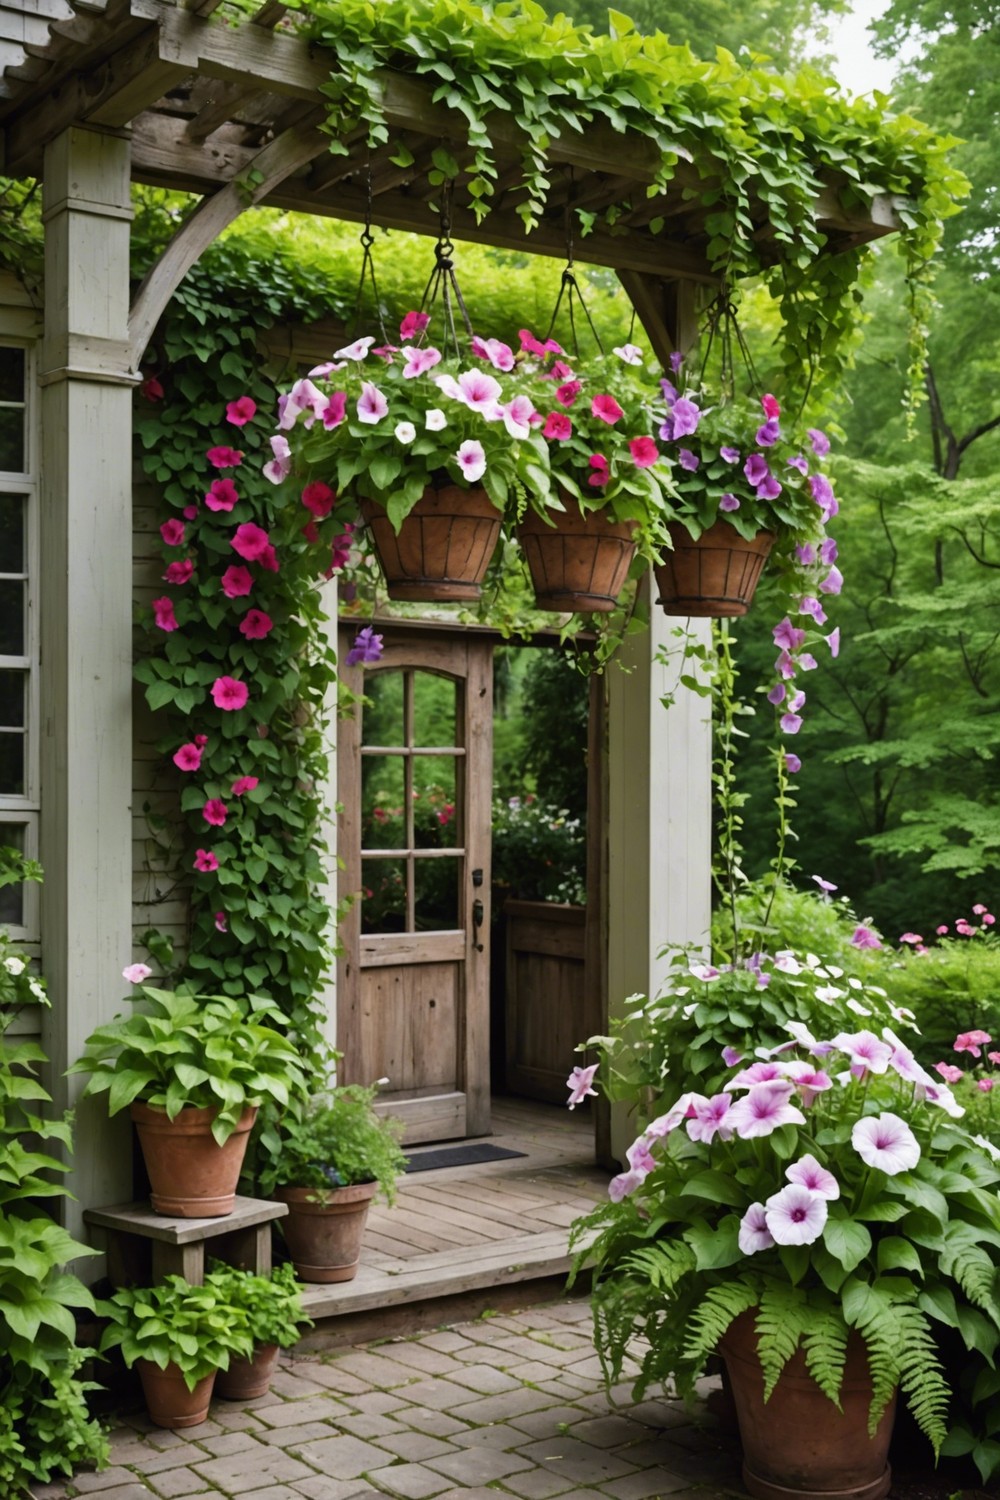 Overflowing Hanging Baskets